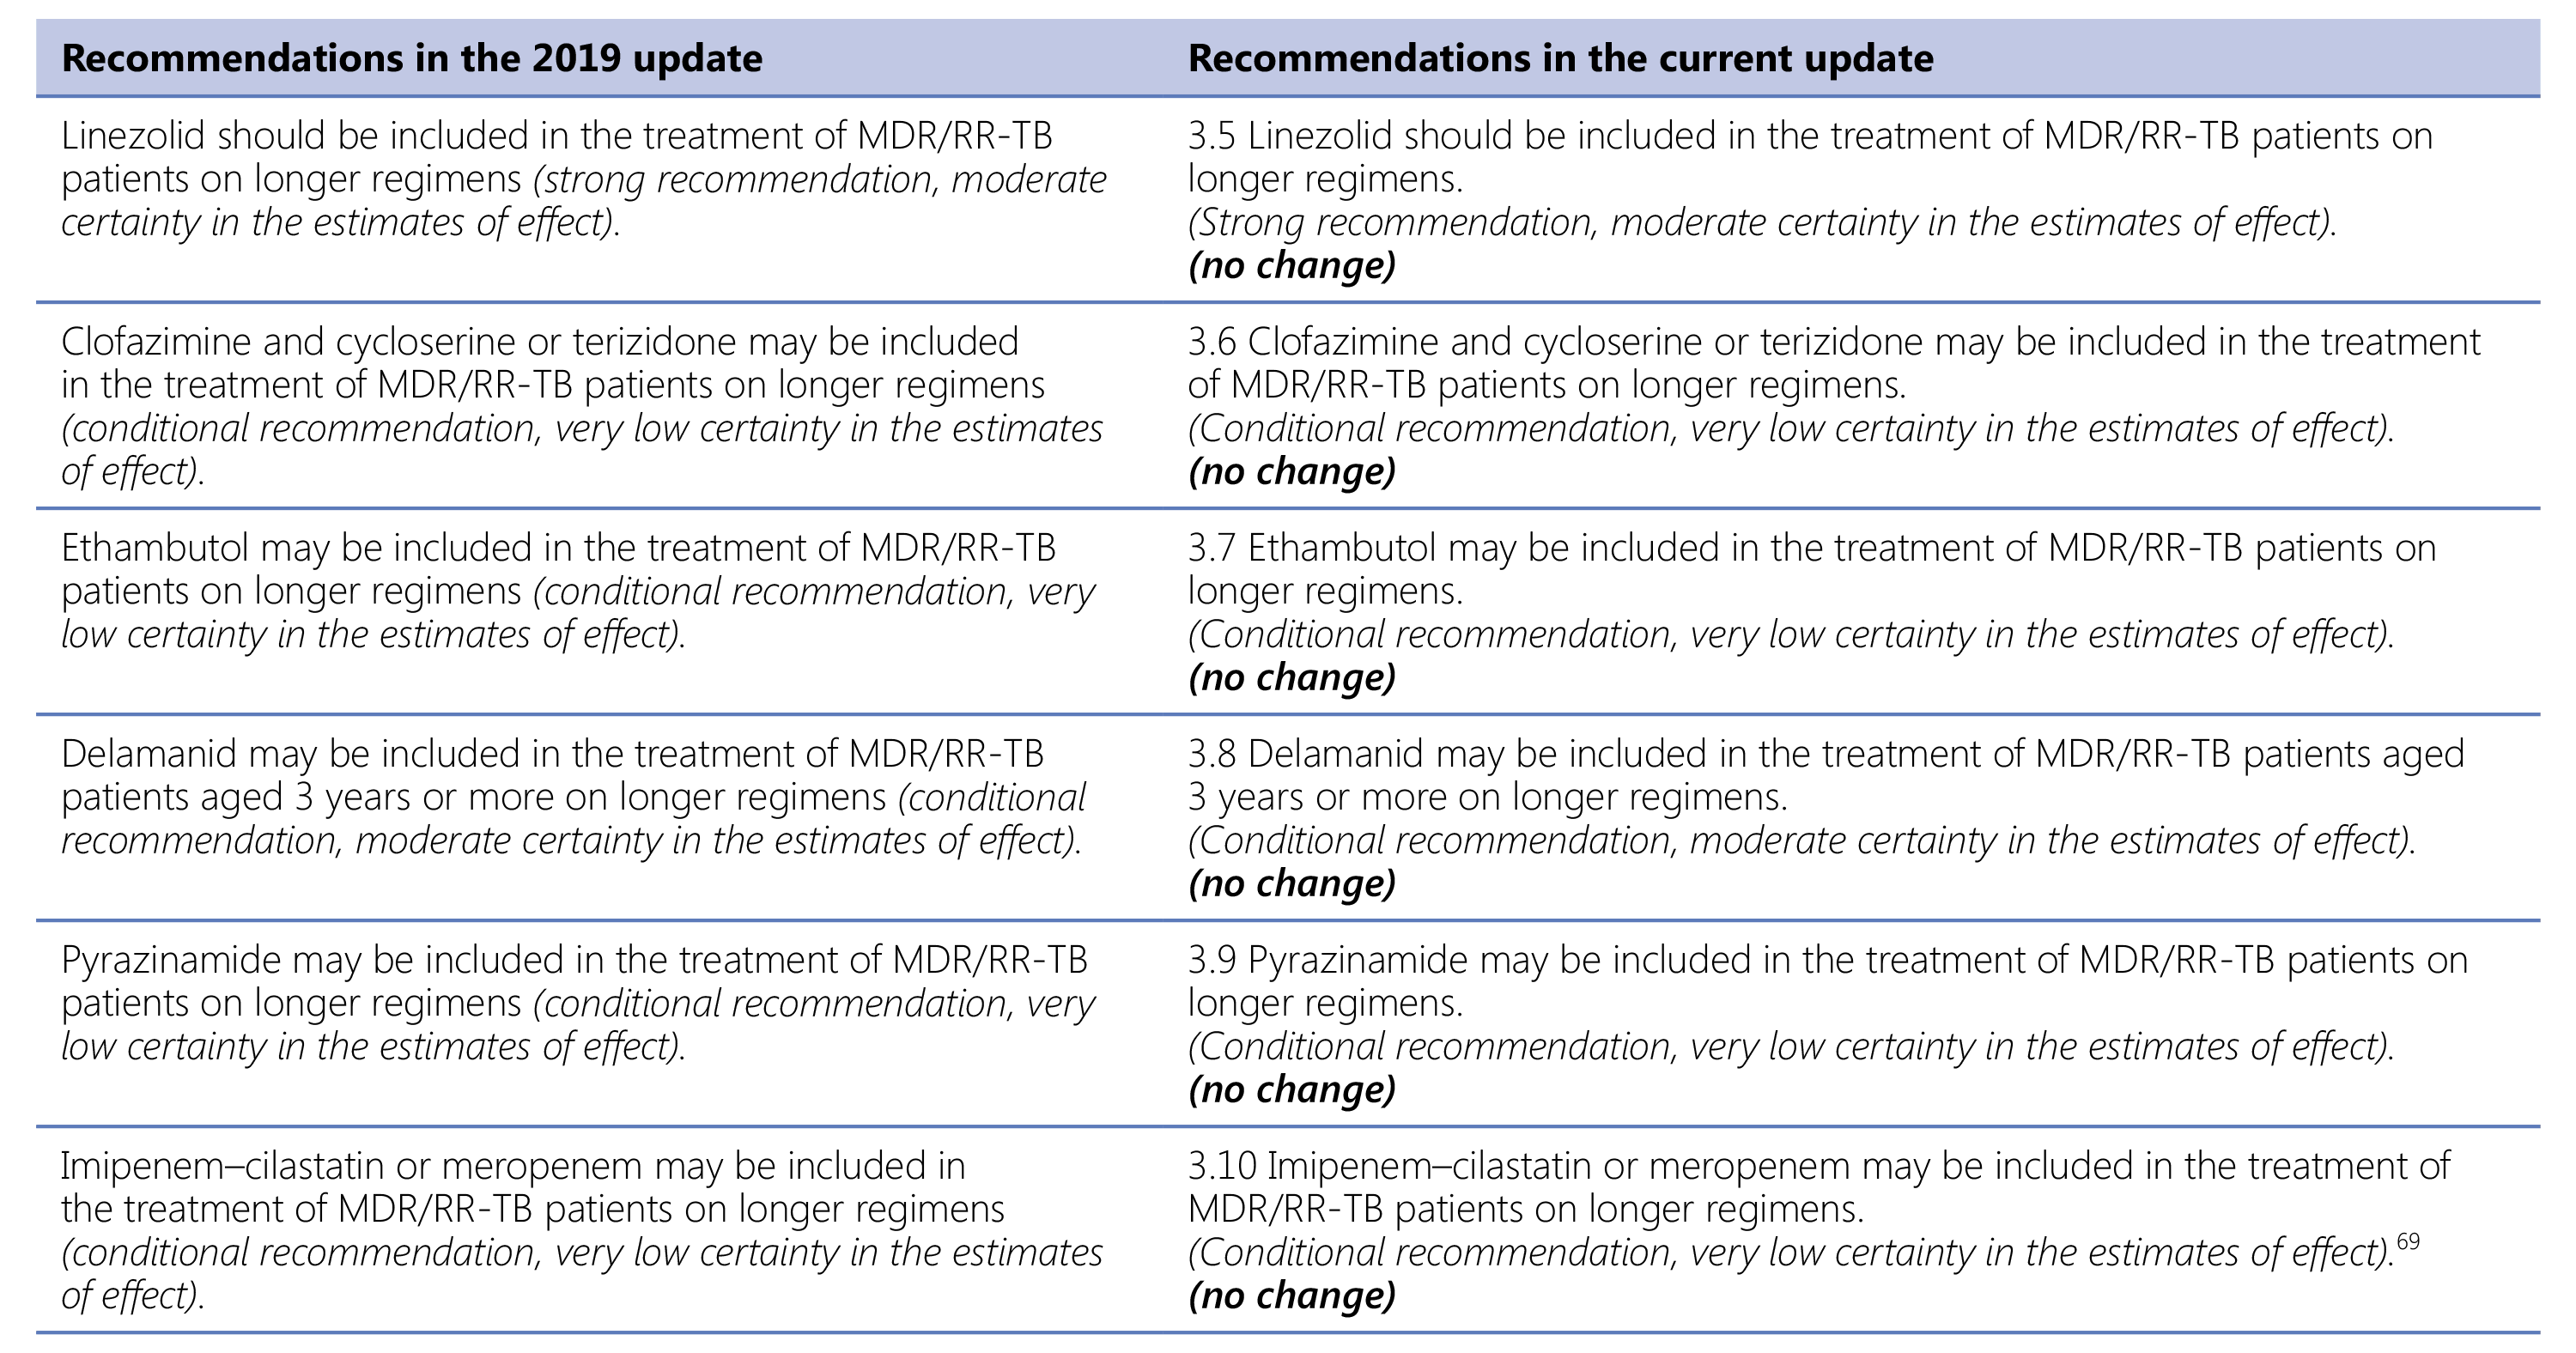 Recommendations in the 2019 update